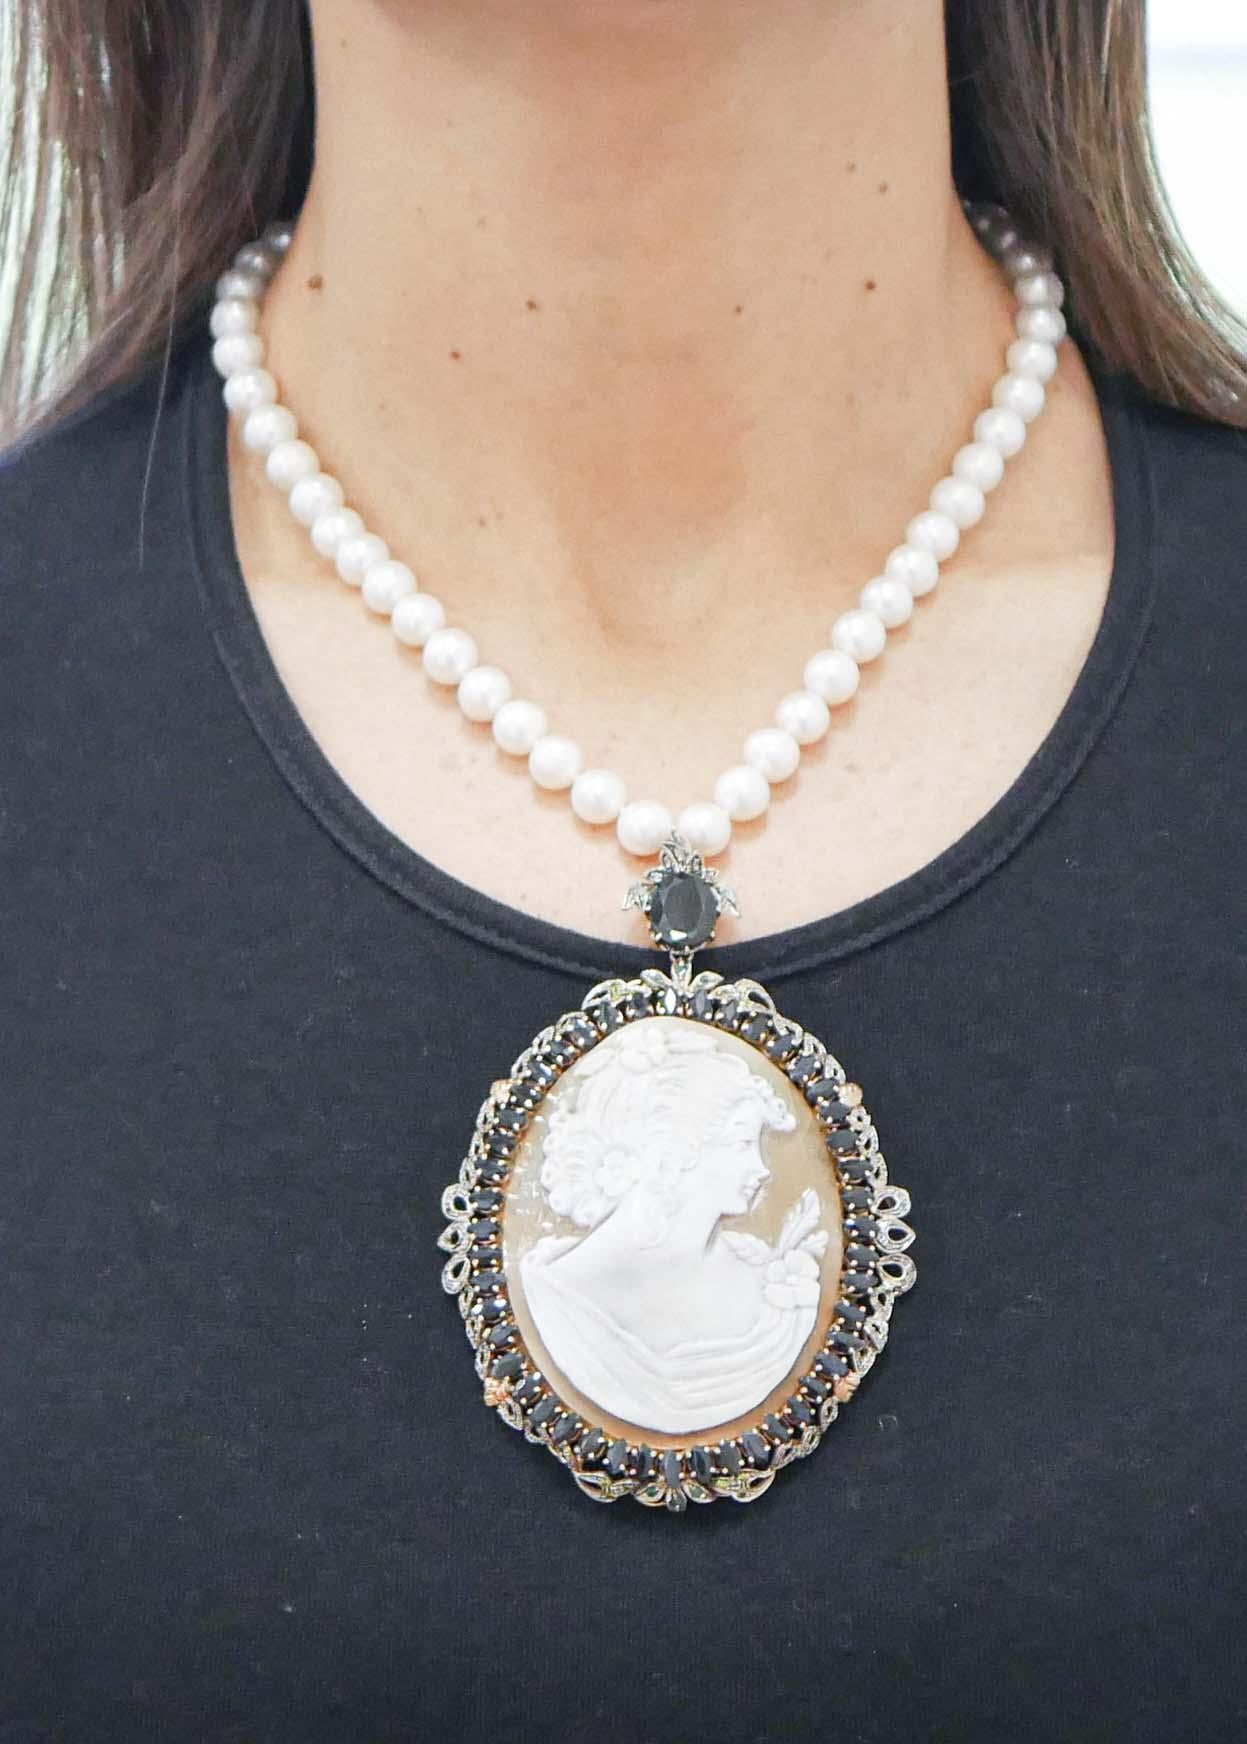 Women's Cameo, Sapphires, Emeralds, Diamonds, Pearls, Rose Gold and Silver Necklace For Sale